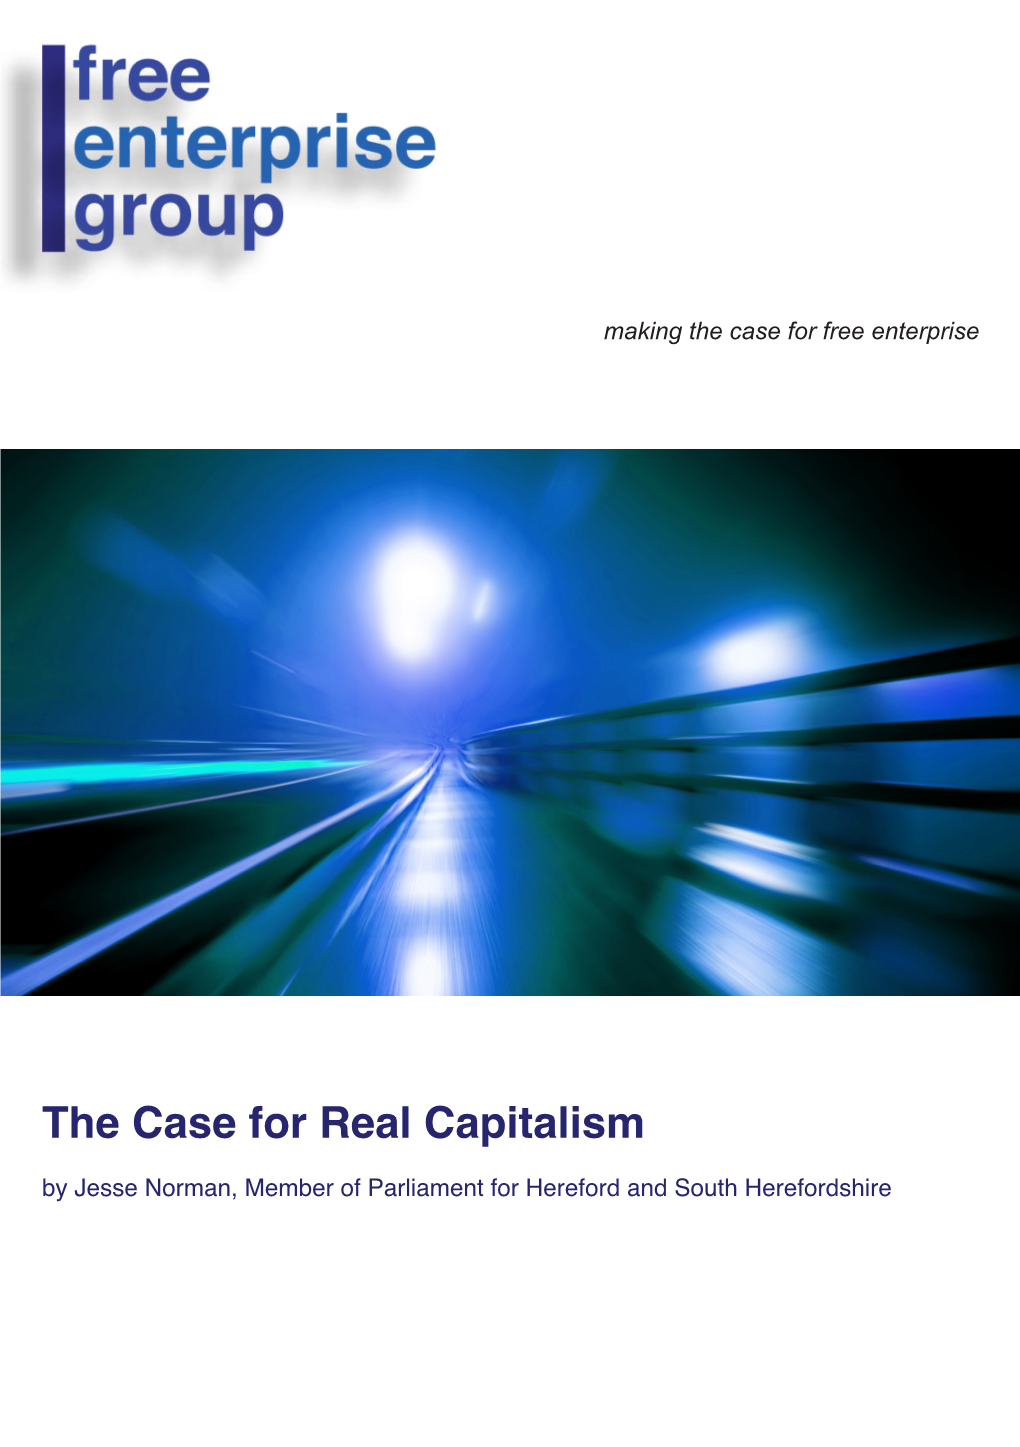 The Case for Real Capitalism by Jesse Norman, Member of Parliament for Hereford and South Herefordshire Contents